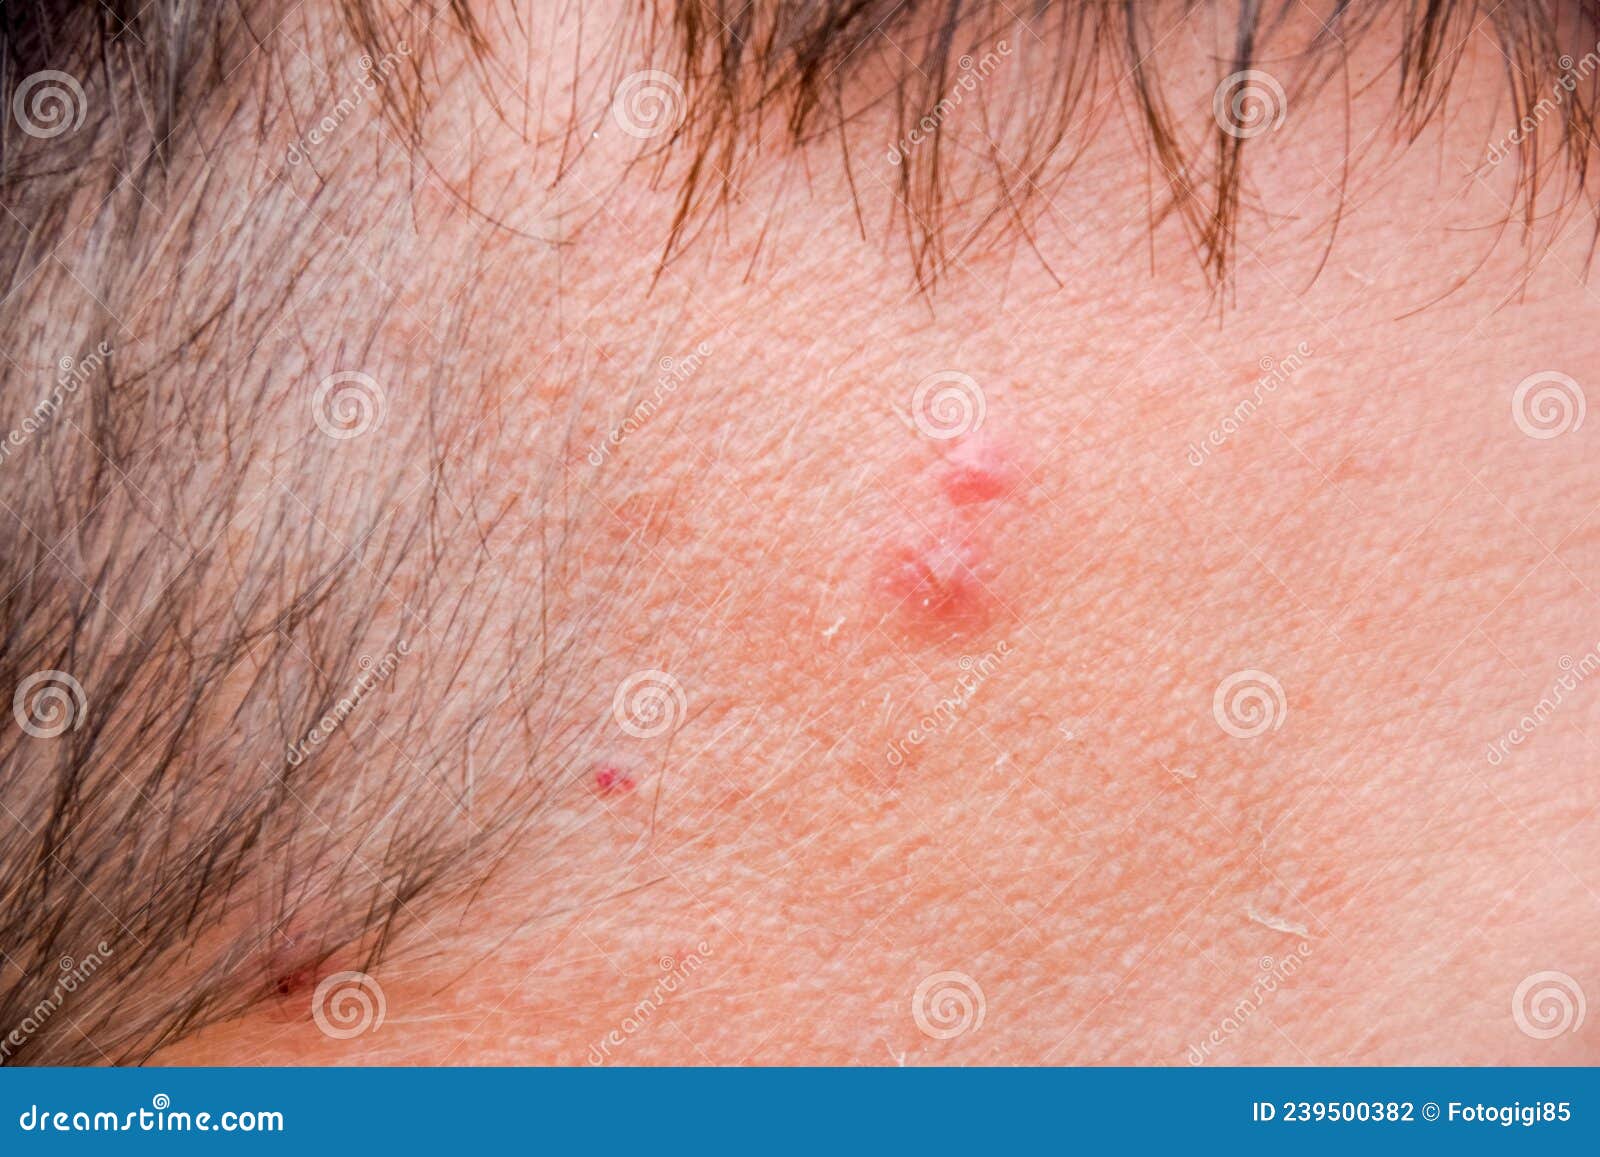 Pimples On The Forehead Of Man Acne On The Forehead Stock Photo